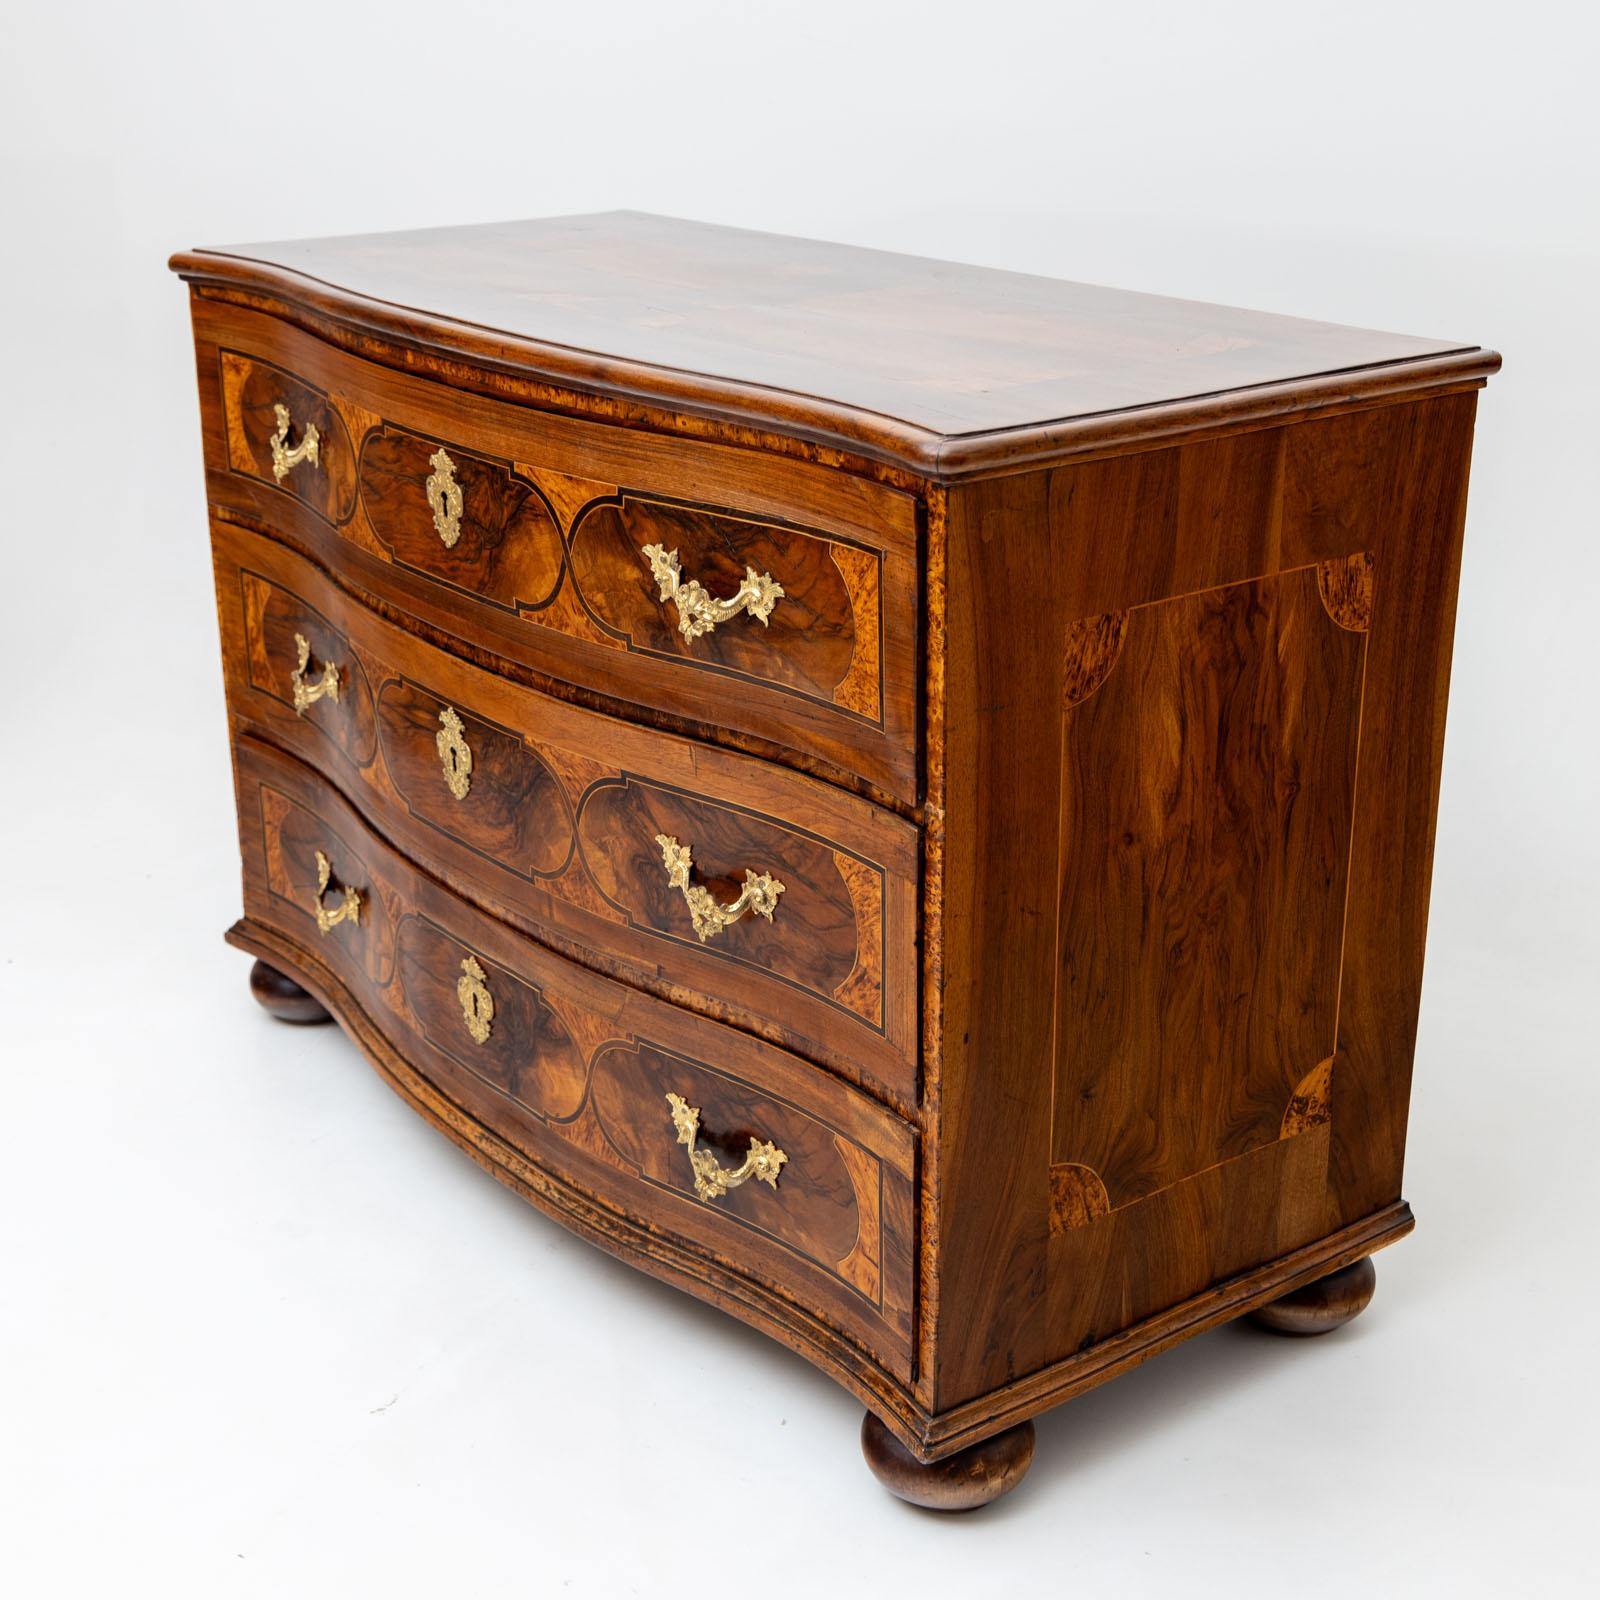 18th Century Baroque Chest of Drawers in Walnut, Inlaywork and Bronze fittings, Mid-18th C. For Sale